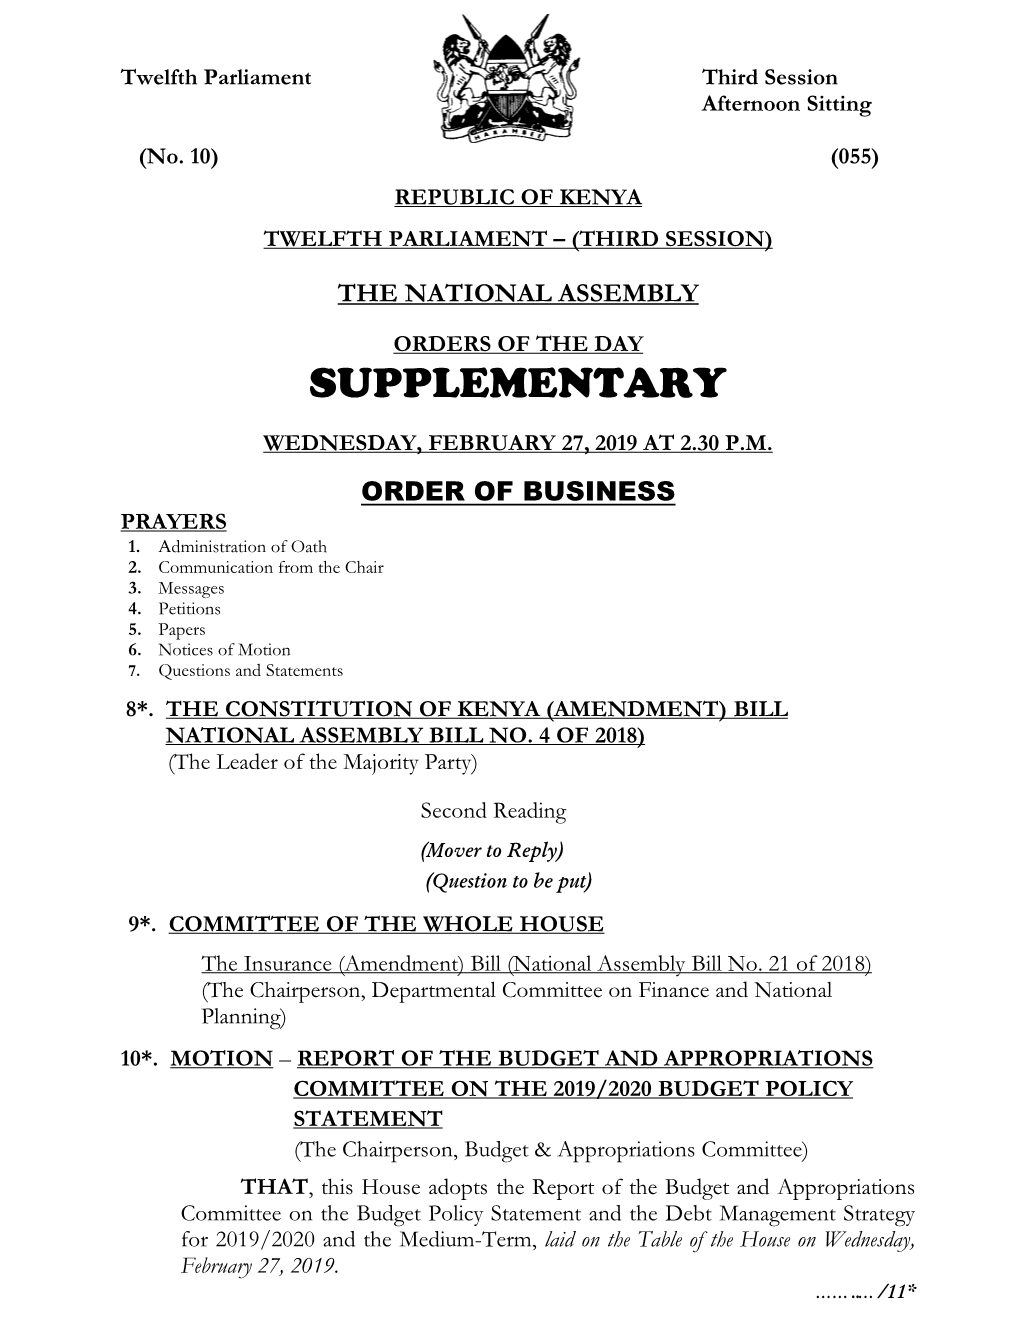 Wednesday, February 27, 2019 at 2.30 P.M.- Supplementary